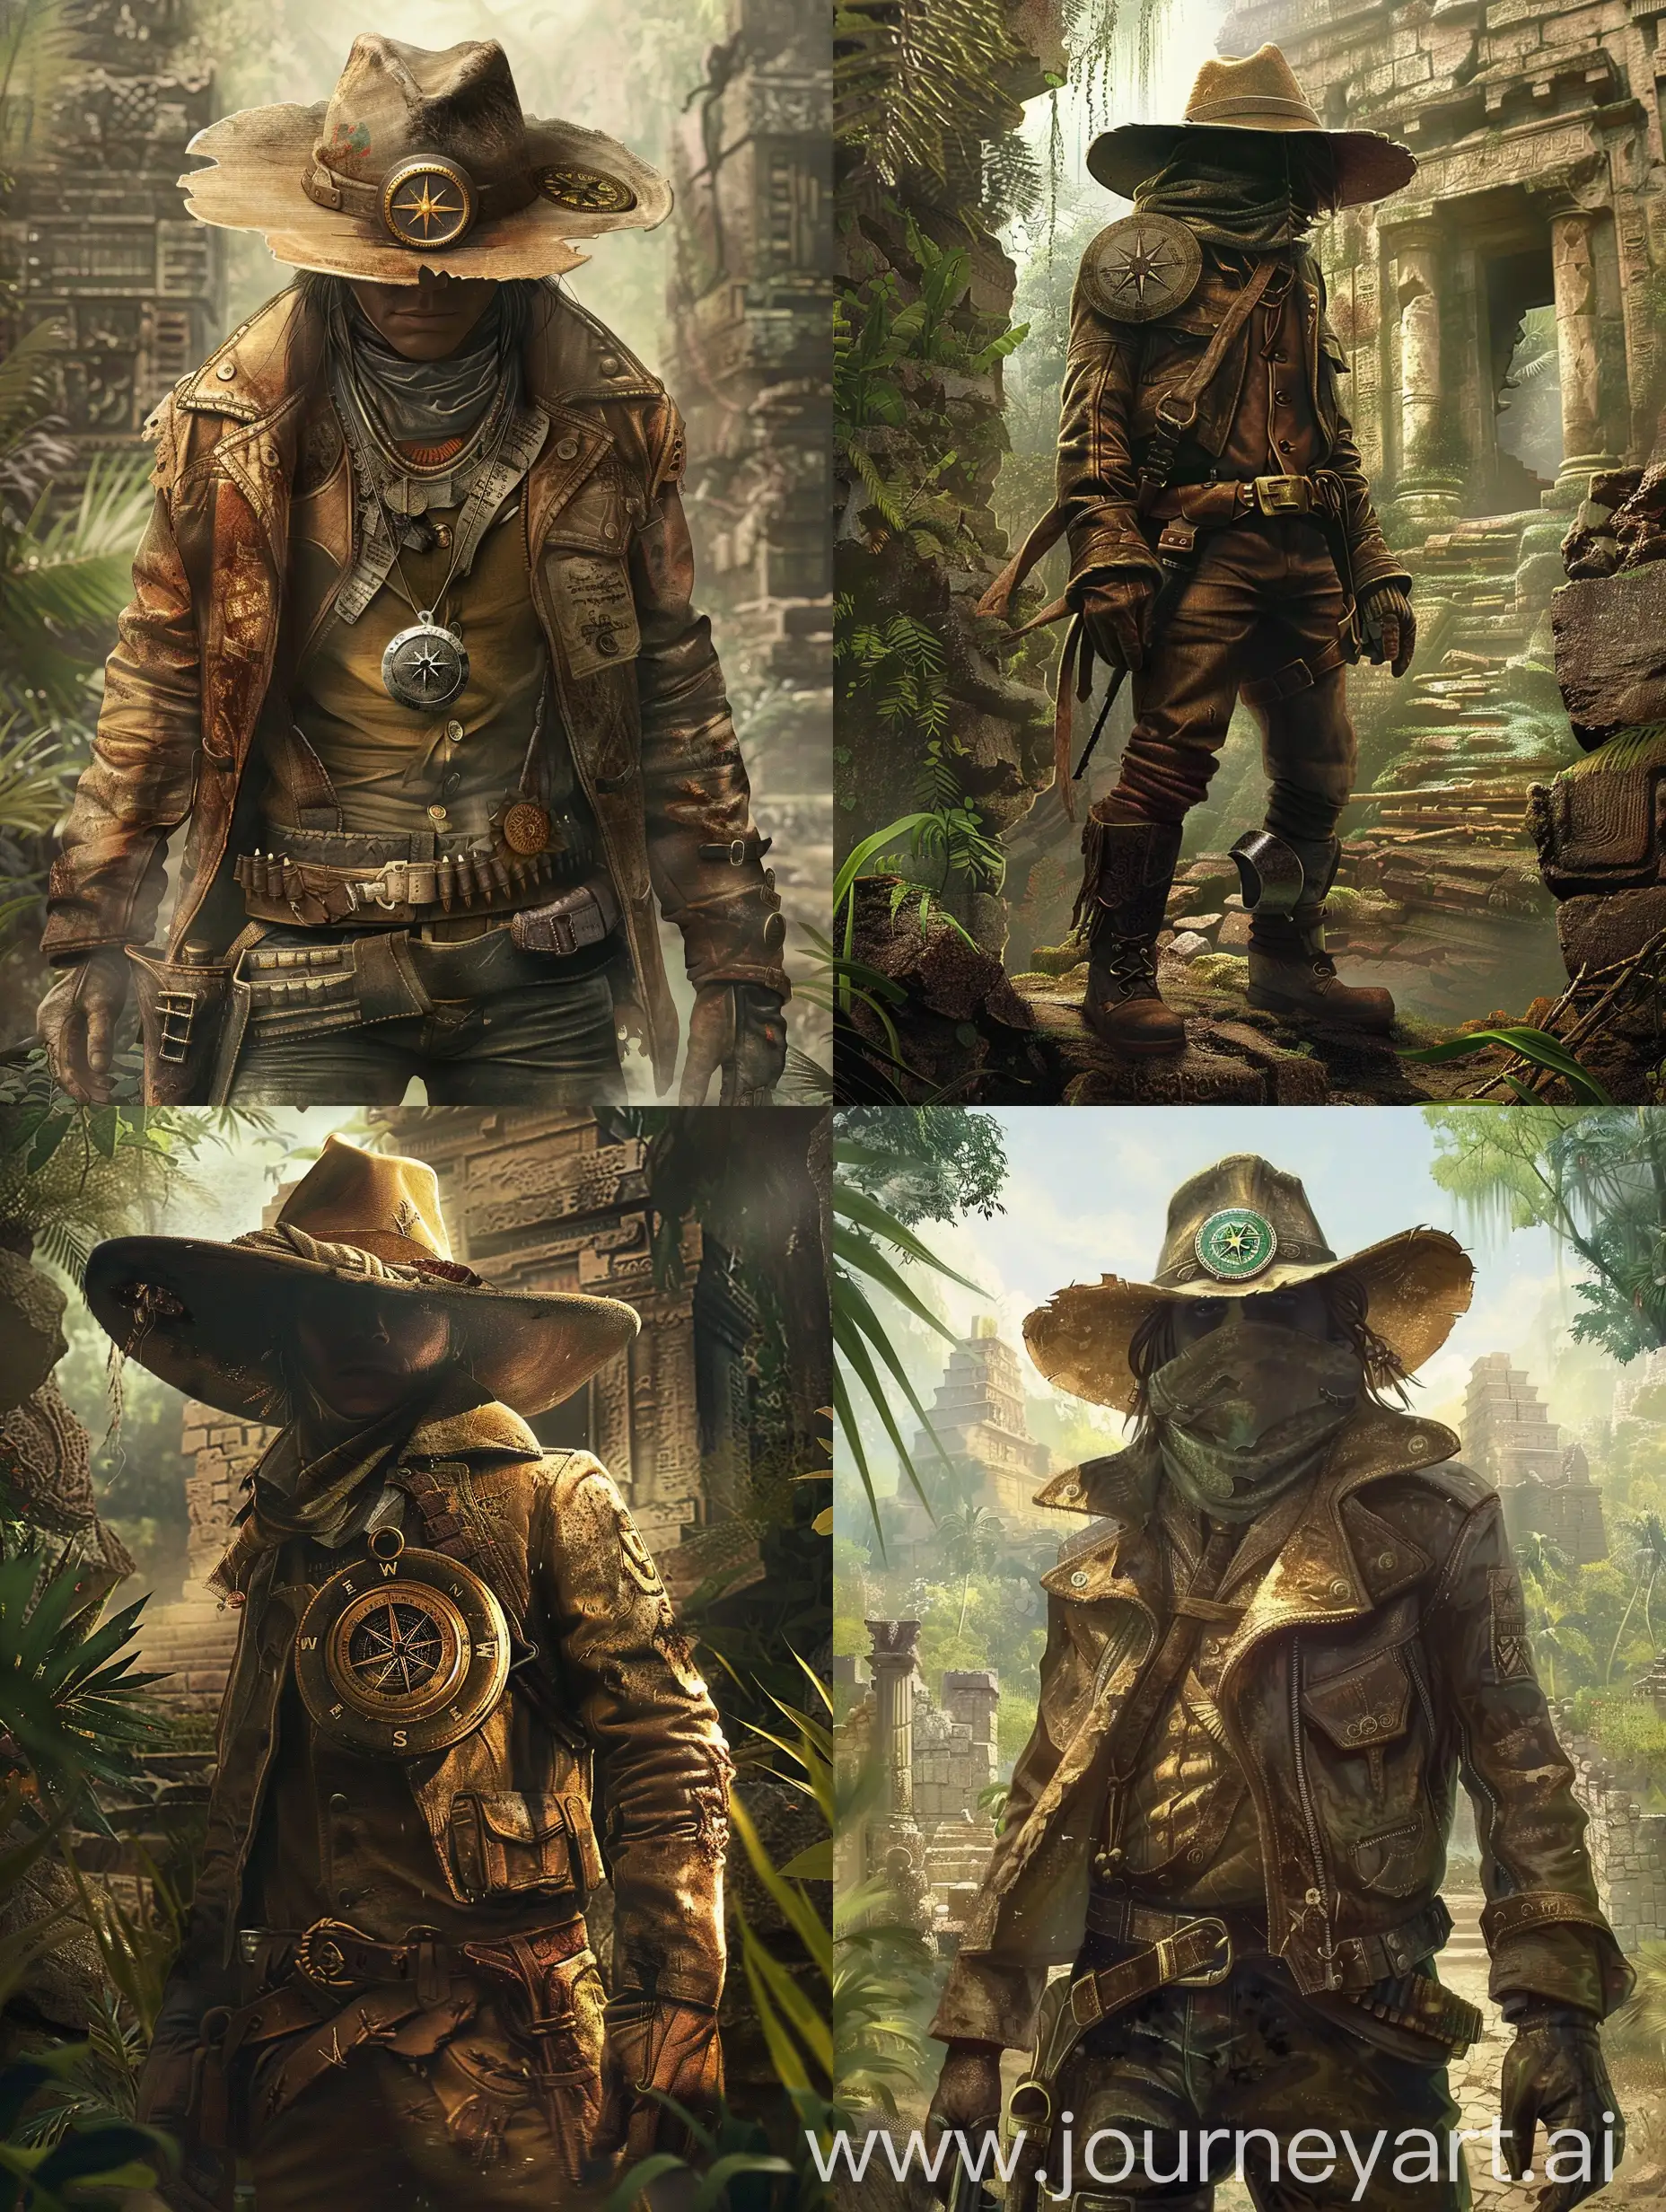 Prompt: You find yourself on an archaeological expedition in search of the legendary Lost City. Clad in your explorer's attire—a weathered leather jacket, sturdy boots, and a wide-brimmed hat adorned with a compass—you face unknown dangers while unraveling the ancient secrets of the forgotten civilization. Amid ancient ruins and dense jungles, you encounter intriguing puzzles and deadly traps. Do you have what it takes to decipher the mysteries of the Lost City and escape with its treasures before it's too late?